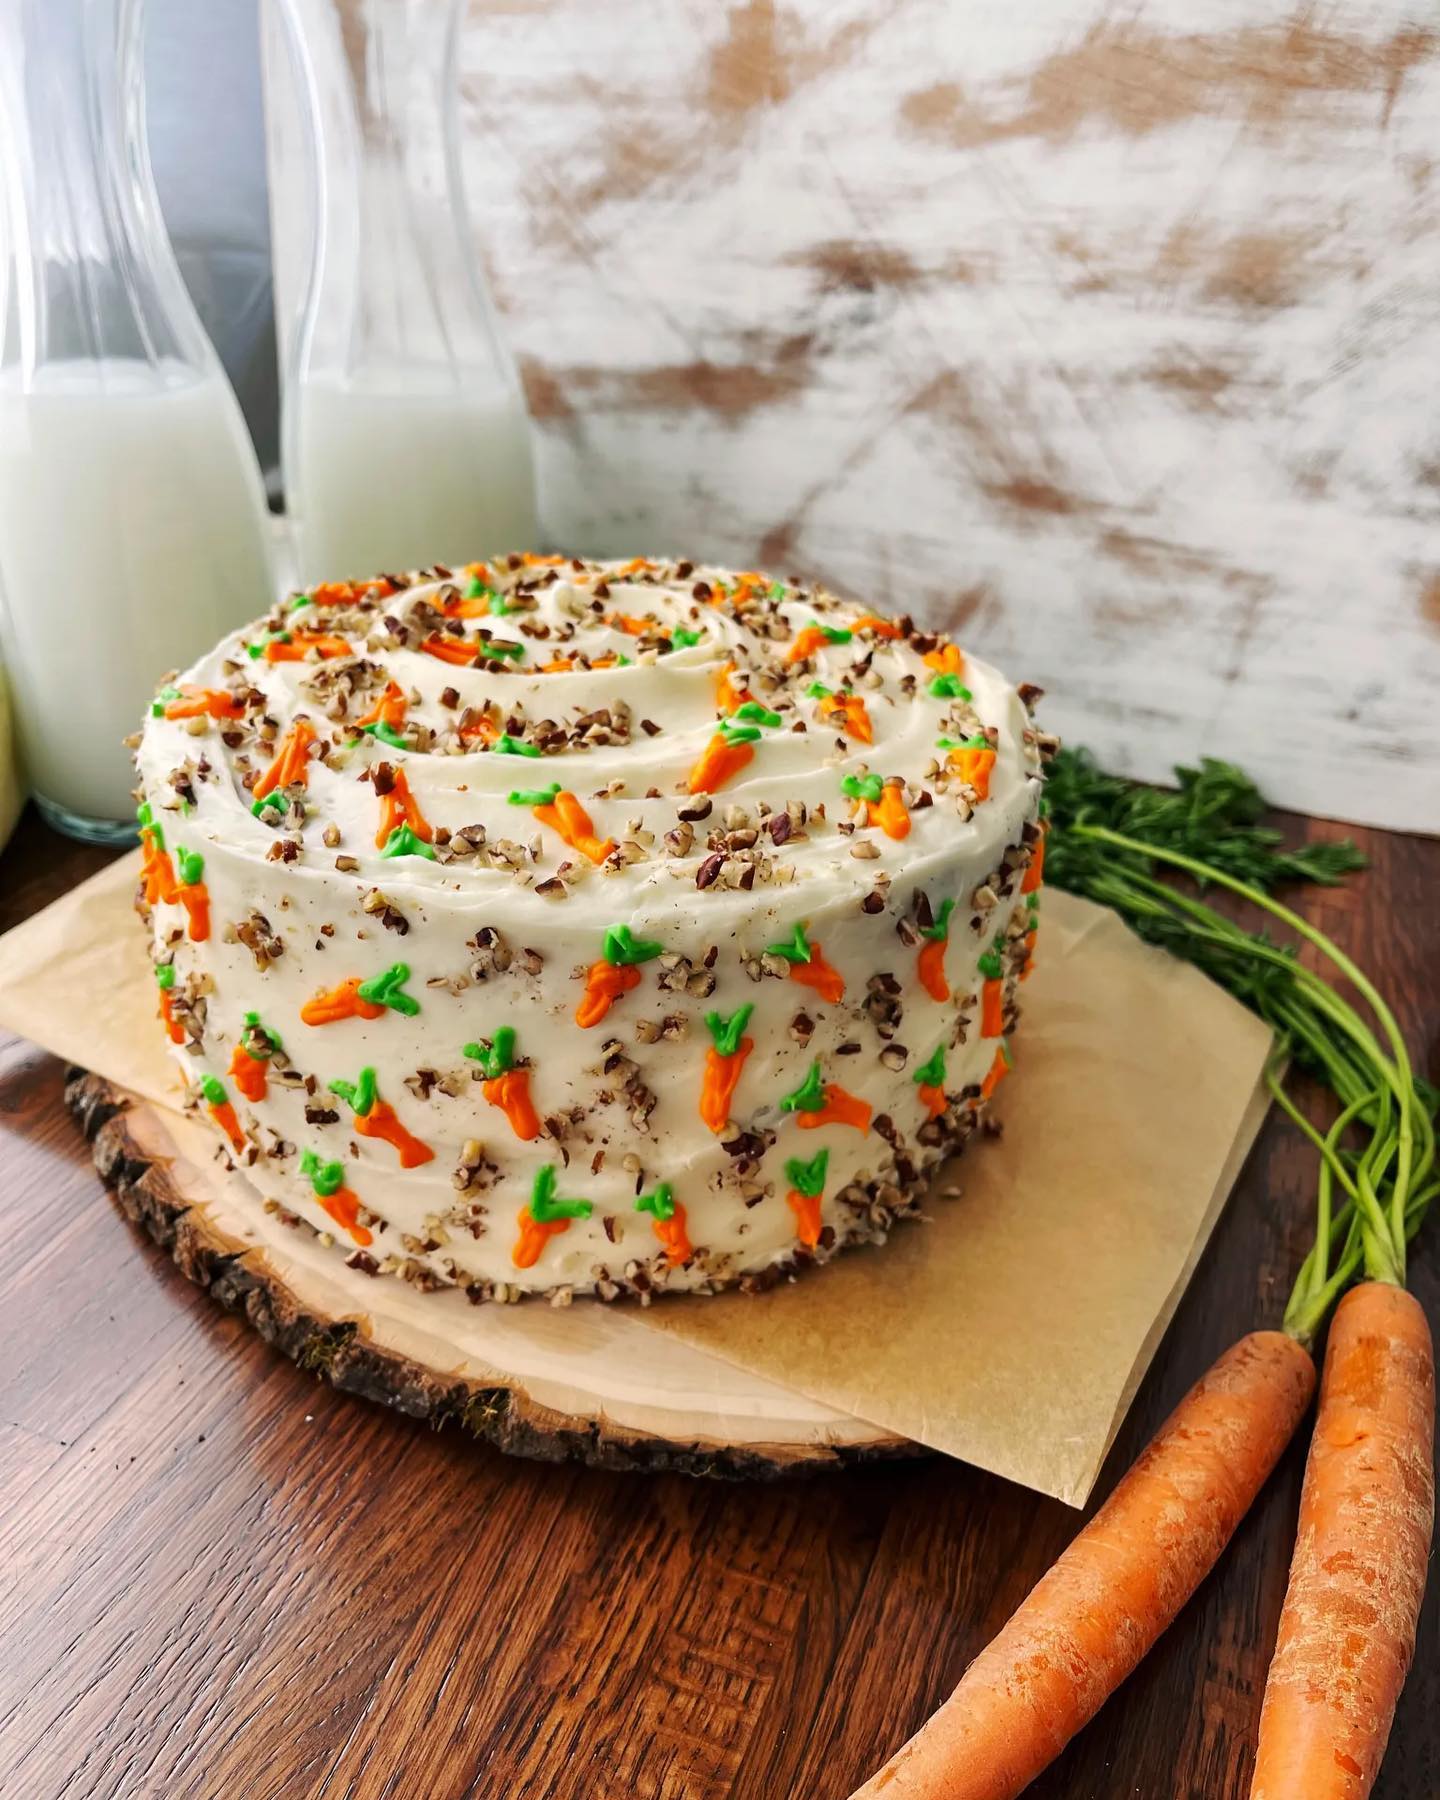 Happy twosday (2/22/22 on tues)! It was a bitter 1°F this morning and all I can look forward to is warm spring days. Fresh breeze, plants, and this spice filled delicious carrot cake. Honestly, carrot cake never goes out of season. Make this cutie to cure your twosday blues. 
.
.
.
https://tuesdaytreats.co/2021/03/31/best-carrot-cake-ever/
.
.
.
#tuesdaytreats #tuesdaytreats2016 #twosday #cake #carrotcake #bakeandshare #thebakefeed #layeredcake #cakelover #cakesofinstagram #thebakefeed #imsomartha #bakersofig #feedfeed #baking #bhgfood #dessert #tohfoodie #foodblogger #f52grams #kitchn #foodtographyschool #creamcheesefrosting #creamcheese #cakedecorating